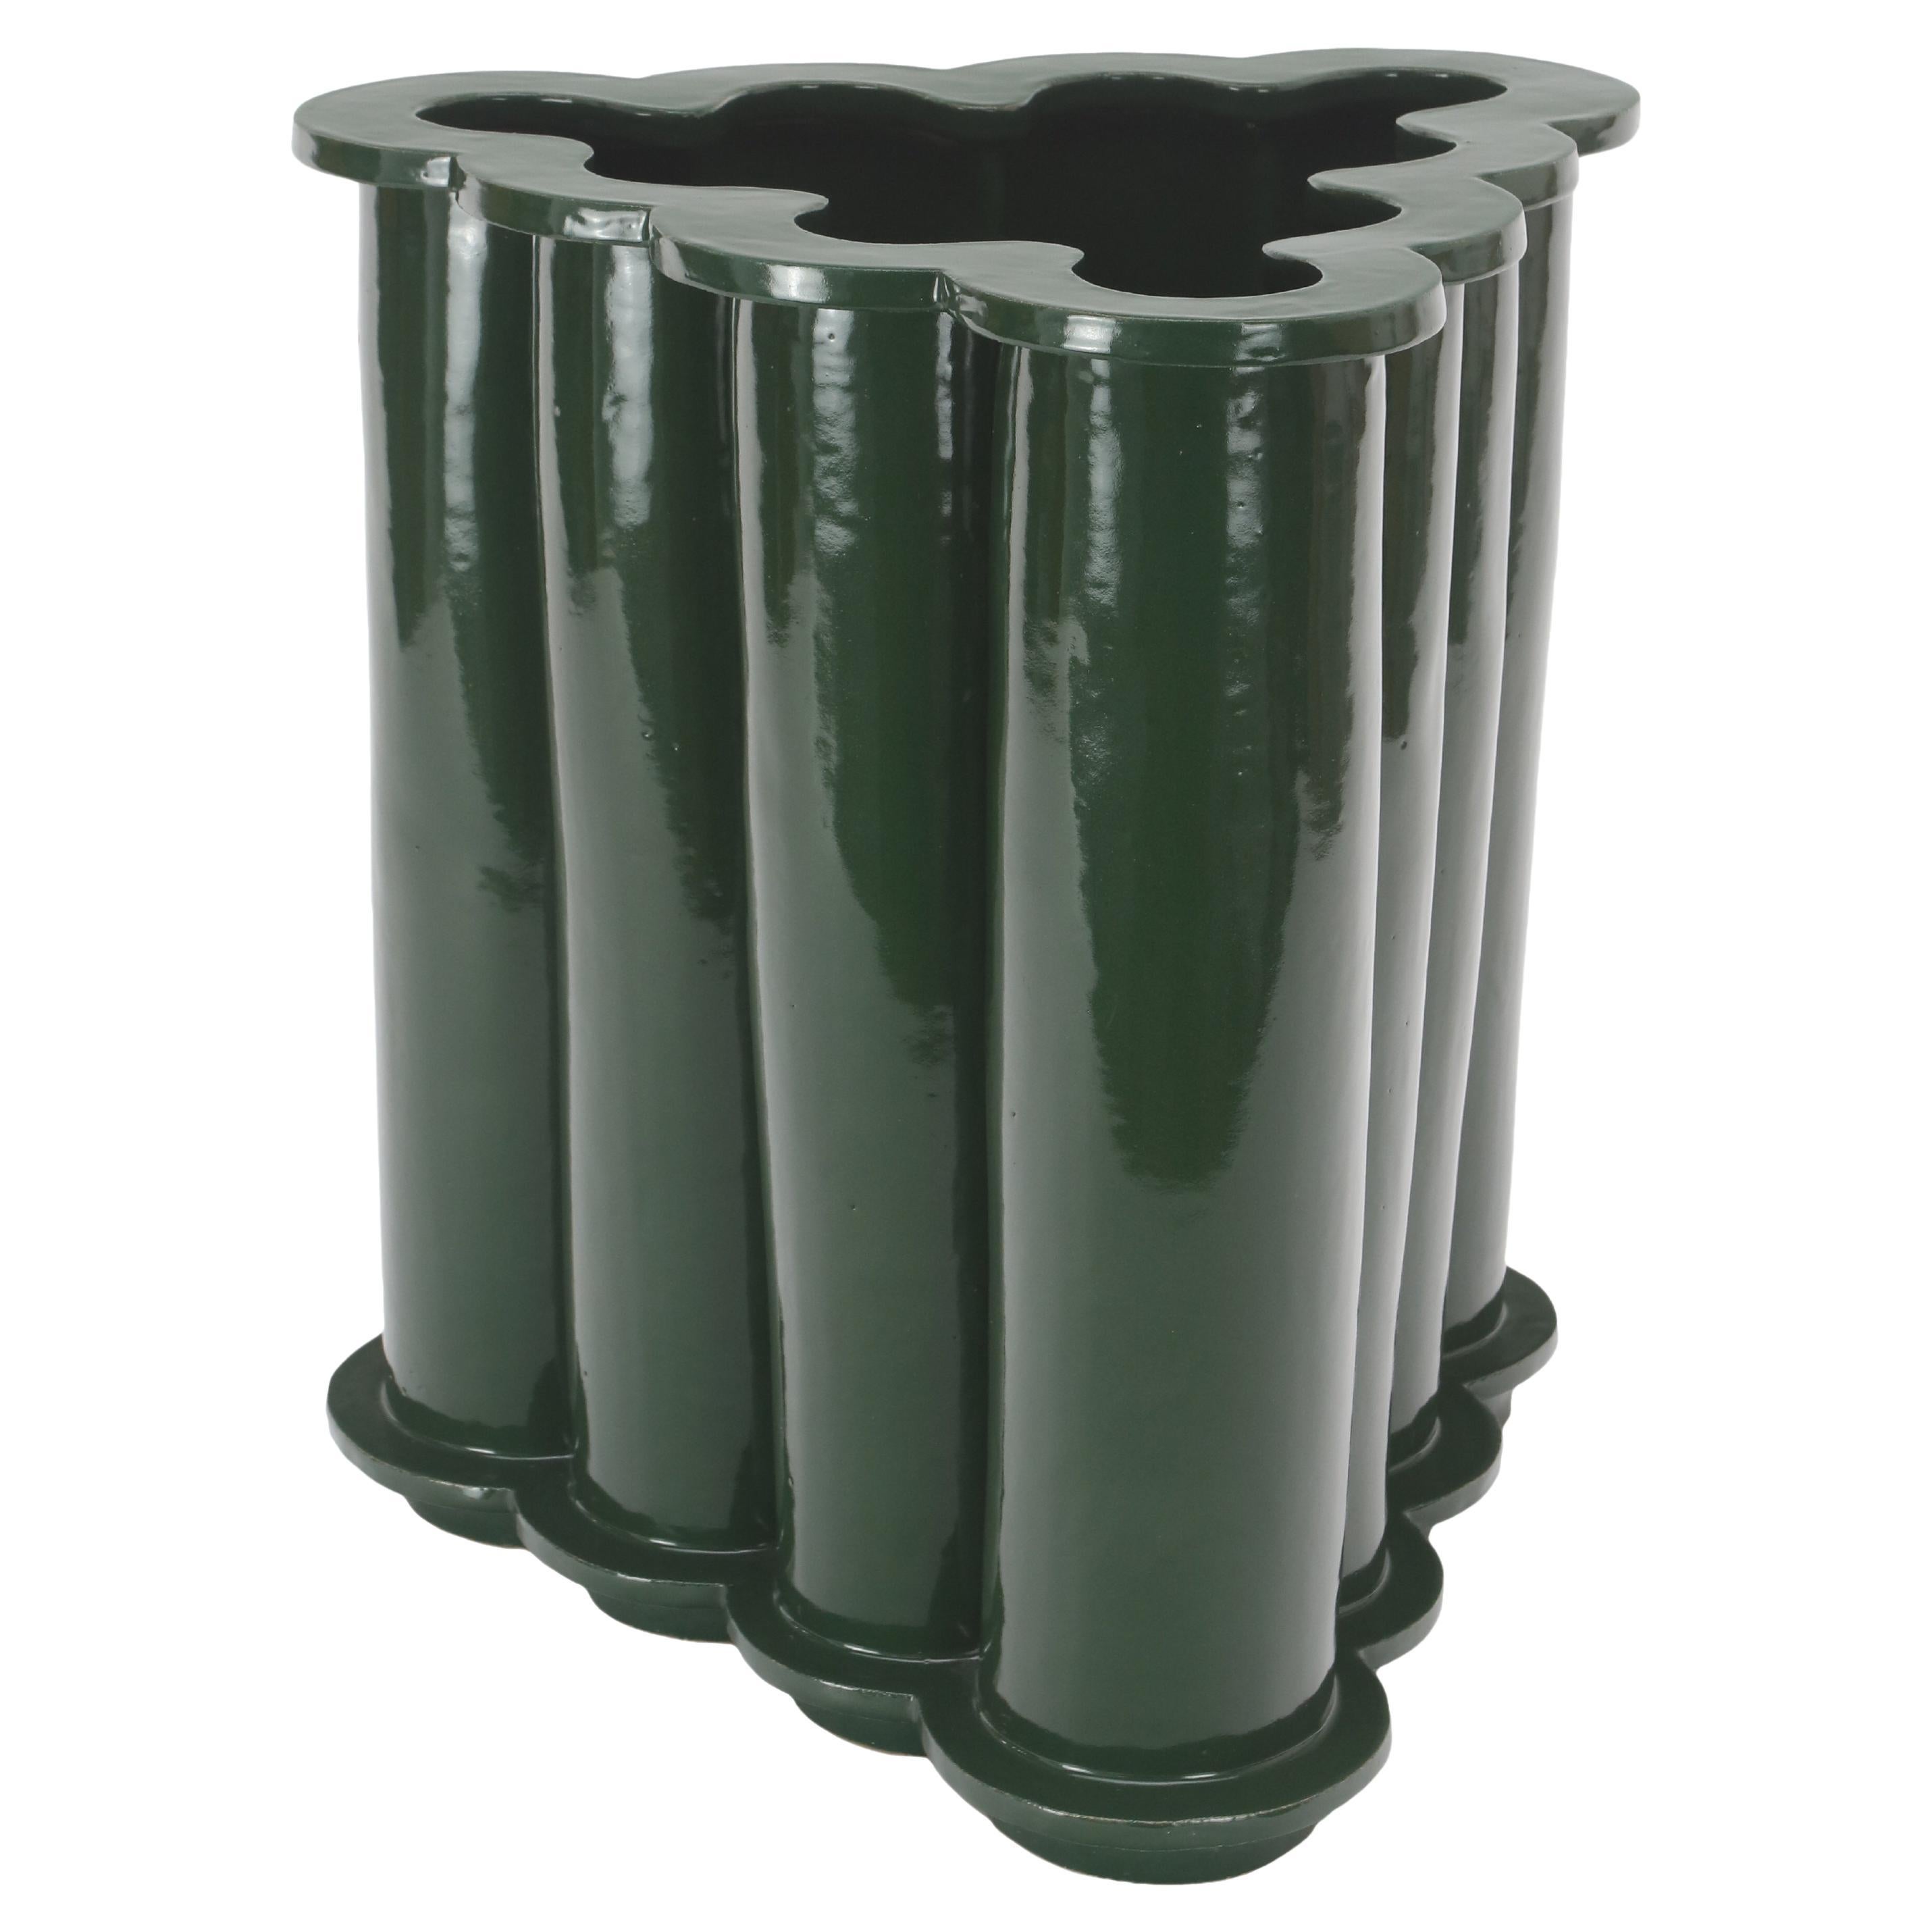 Tall Ruffle Ceramic Planter in Chrome Green by Bzippy For Sale